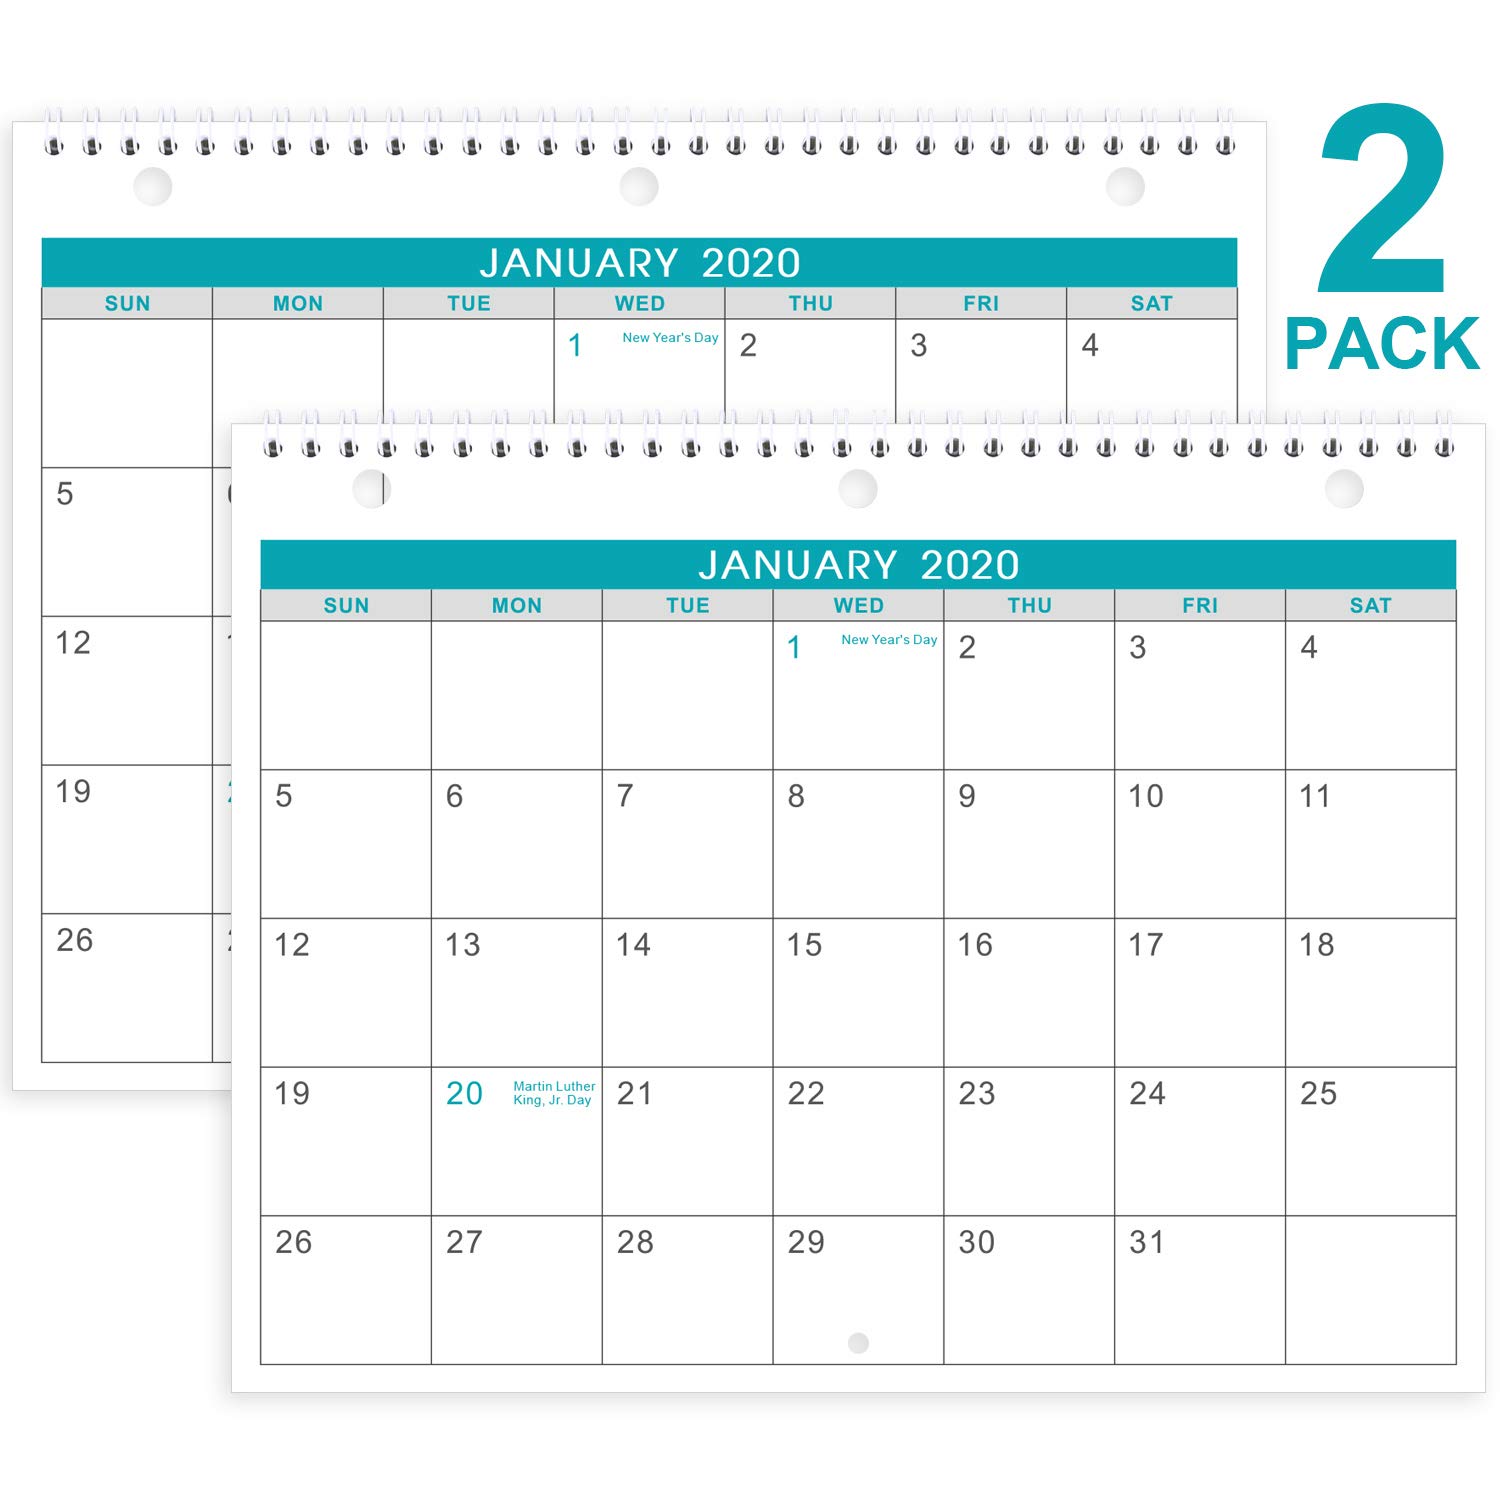 Book Cover 2020-2021 Calendar - 2 Pack Monthly Wall/Desk Calendar, Generous Memo Lined Pages with A4 Premium Thick Paper, 18 Months, January 2020 - June 2021, 11 x 8.5 Inches